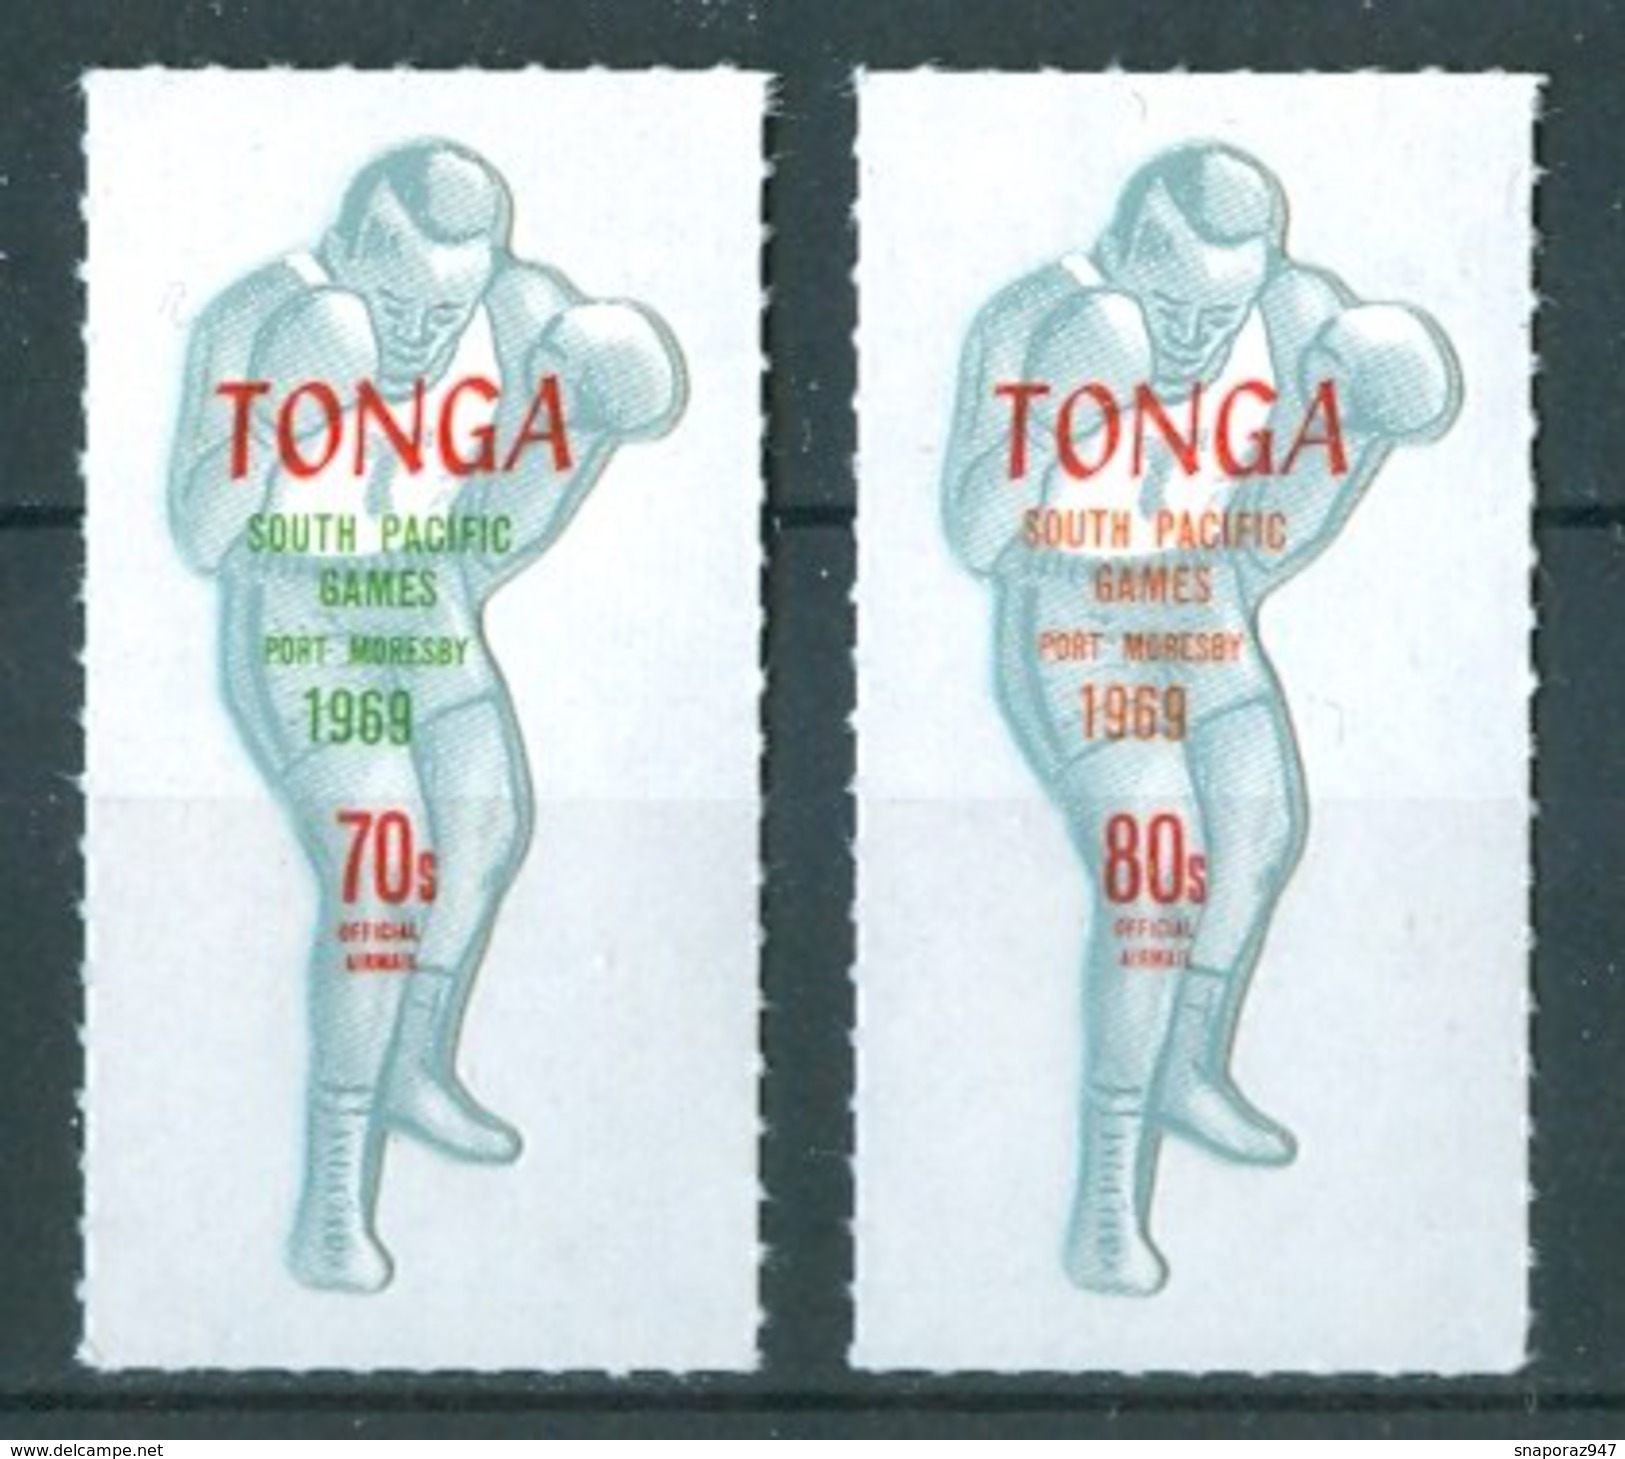 1969 Tonga Sports Games Of The Souty Pacific In Port Moresby  Adhesives Ordinary / Airmail / Air Service Set ** E16 - Tonga (...-1970)